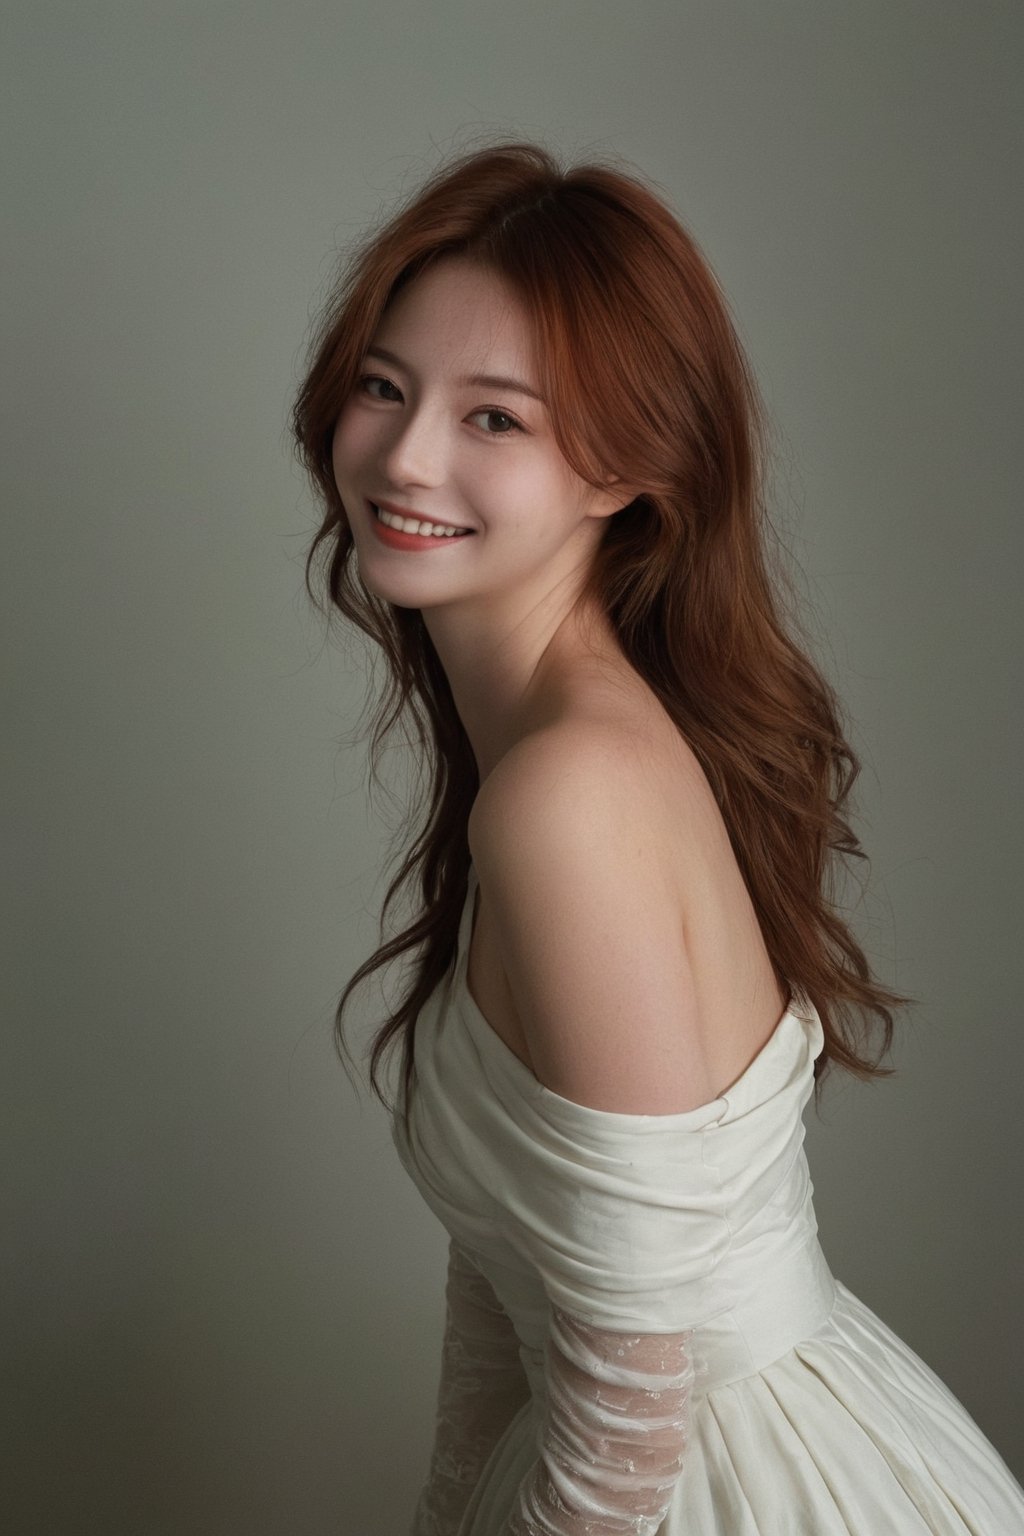  ultra wide field, ultra dynamic lighting amazing shadows, Deep photo,depth of field,shadows,
hubggirl, messy hair,smile:0.8,grainy,dimly lit,red hair,white backless_dress,